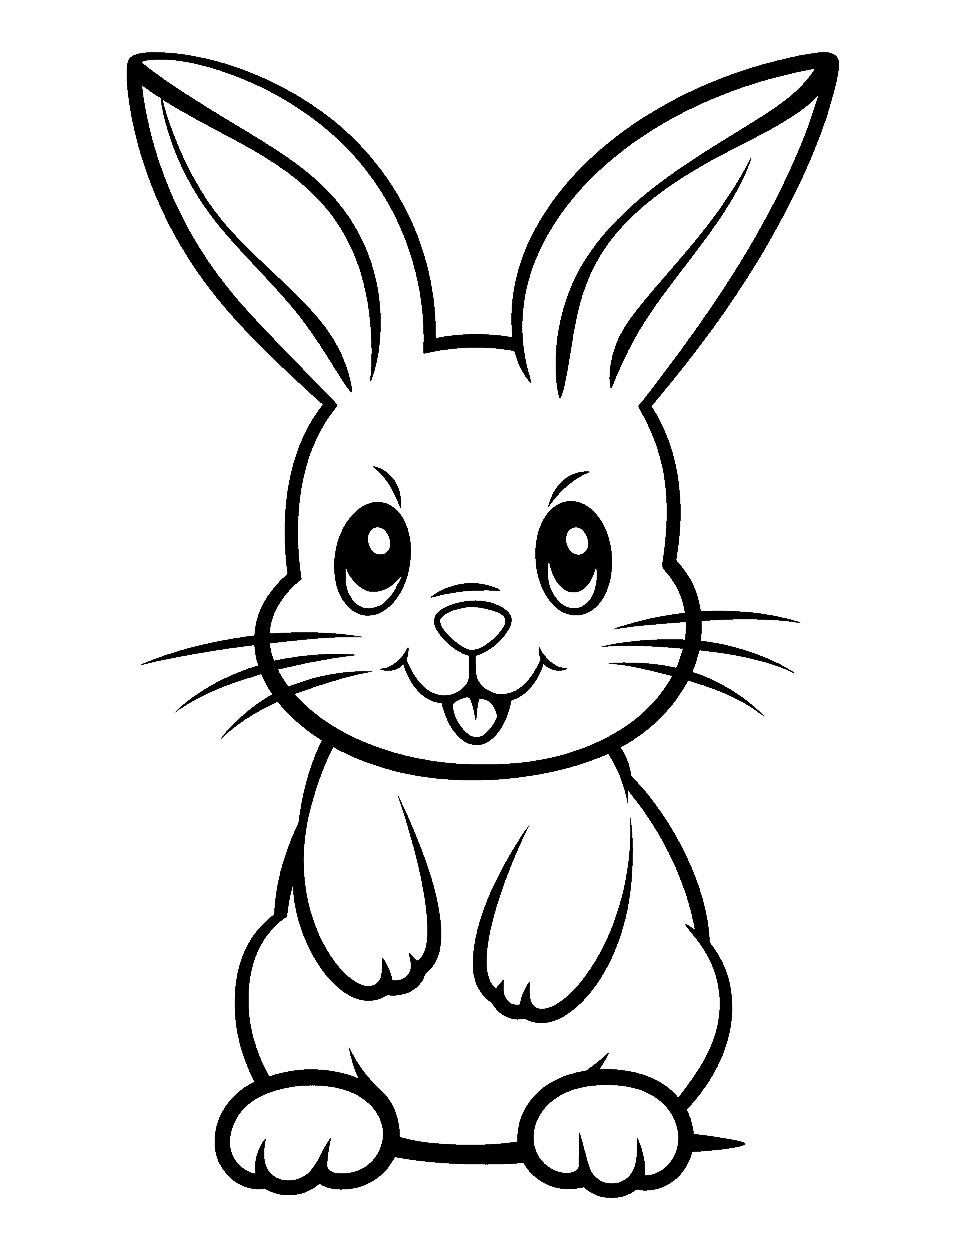 Easy Bunny for Beginners Coloring Page - A straightforward bunny drawing with no intricate details, best suited for young kids.